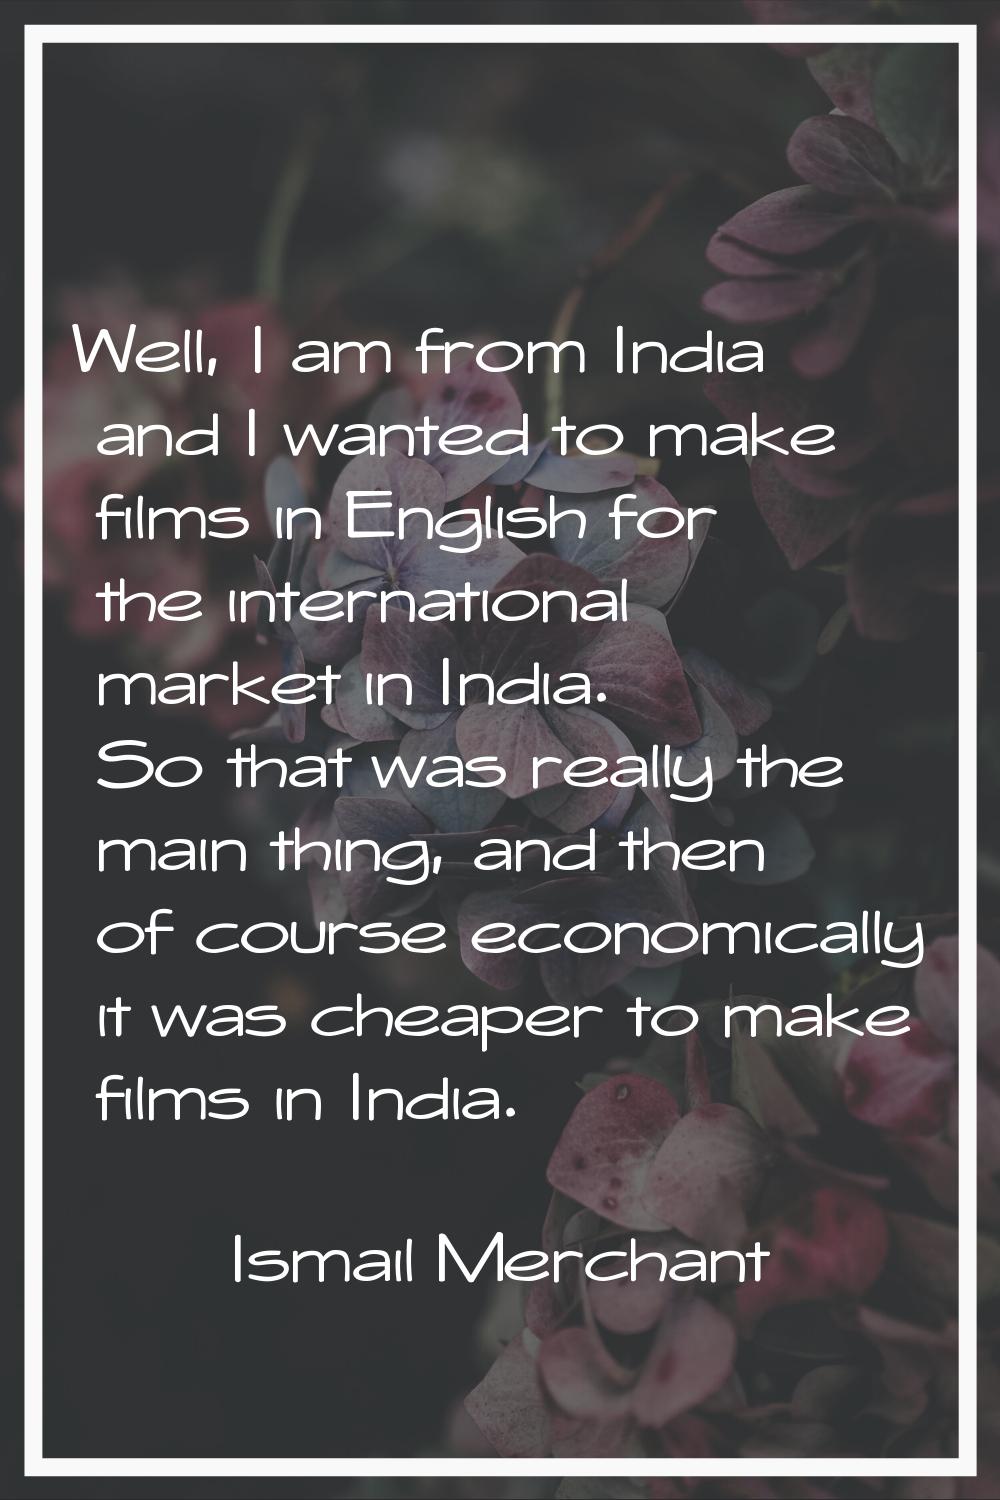 Well, I am from India and I wanted to make films in English for the international market in India. 